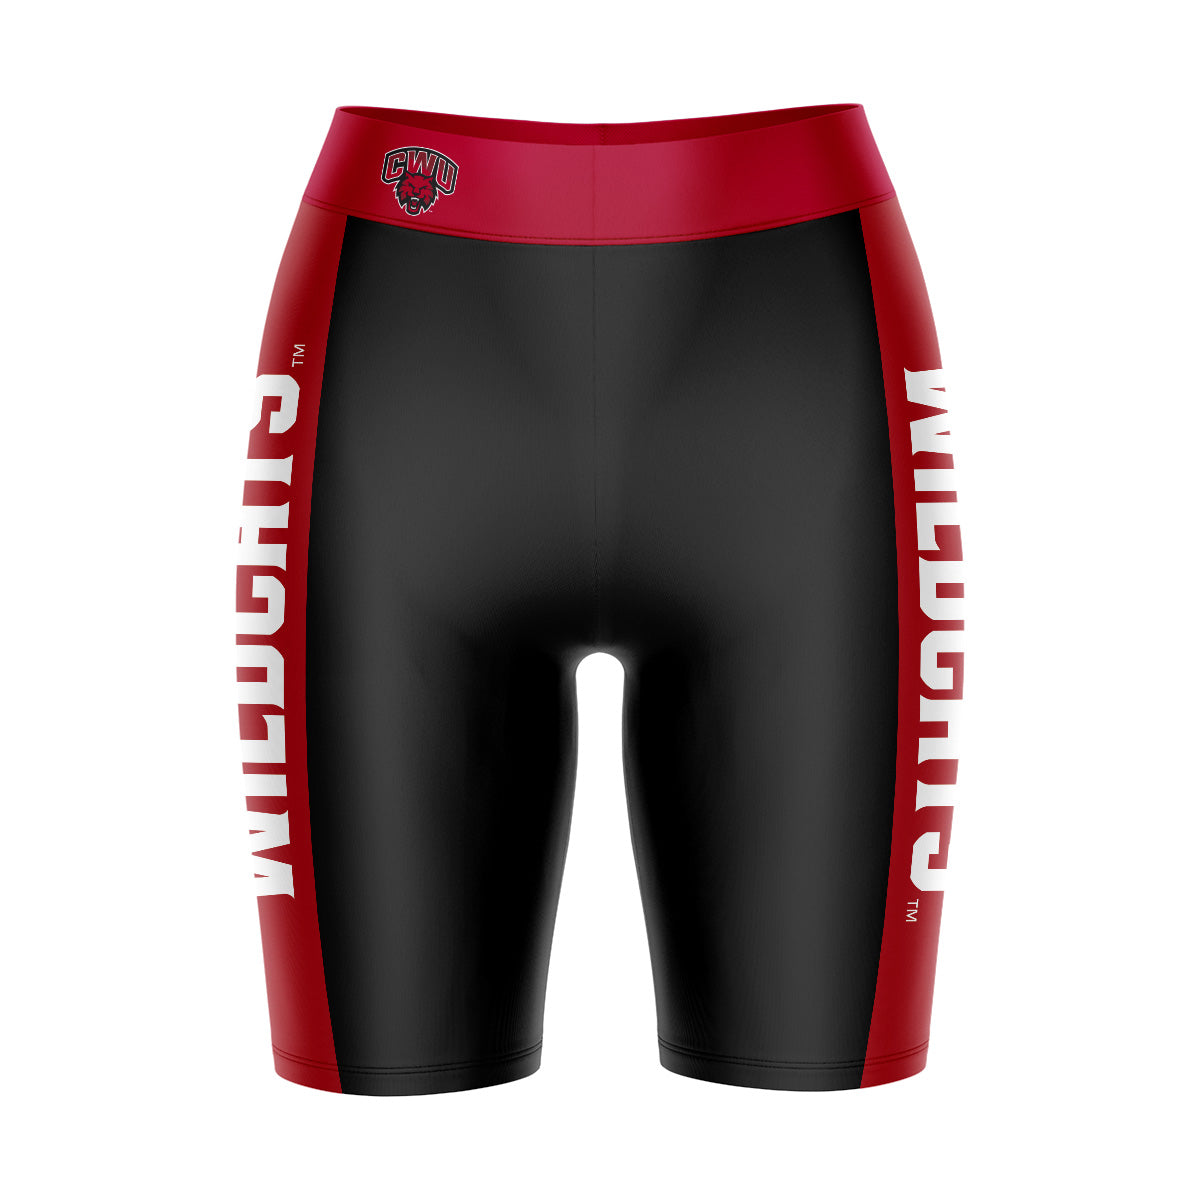 CWU Wildcats Vive La Fete Game Day Logo on Waistband and Red Stripes Black Women Bike Short 9 Inseam"